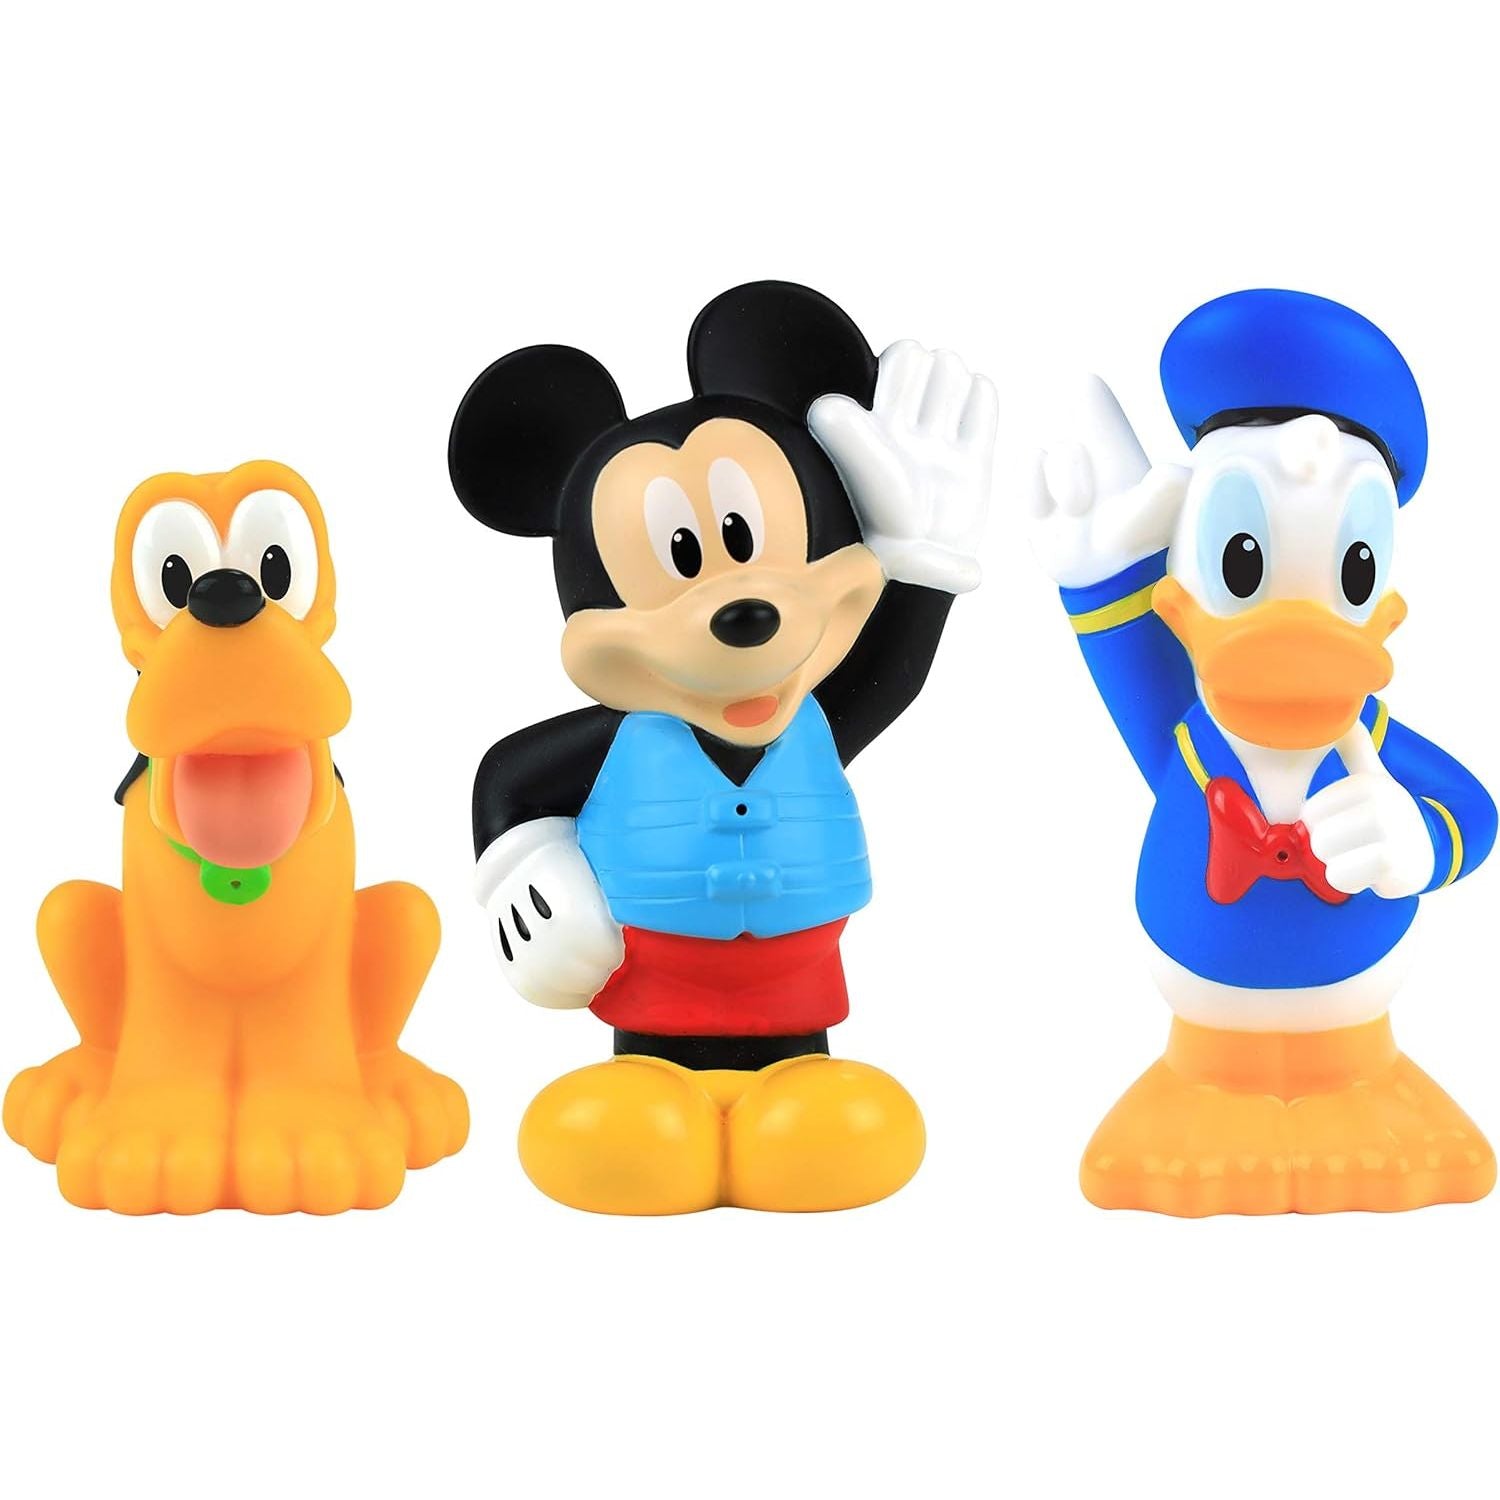 Disney Junior Mickey Mouse Bath Toy Set, Includes Mickey Mouse, Donald Duck, and Pluto Water Toys